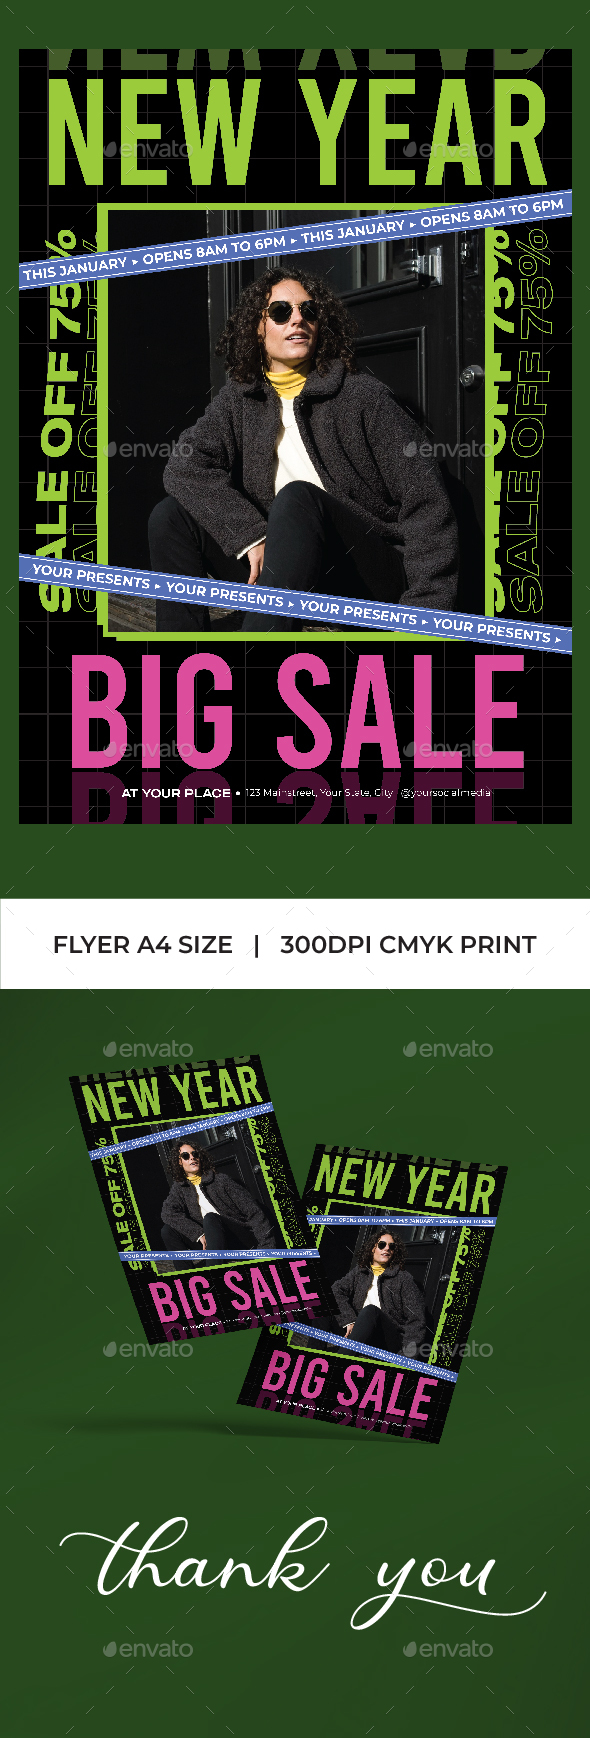 [DOWNLOAD]New Year Sale Flyer